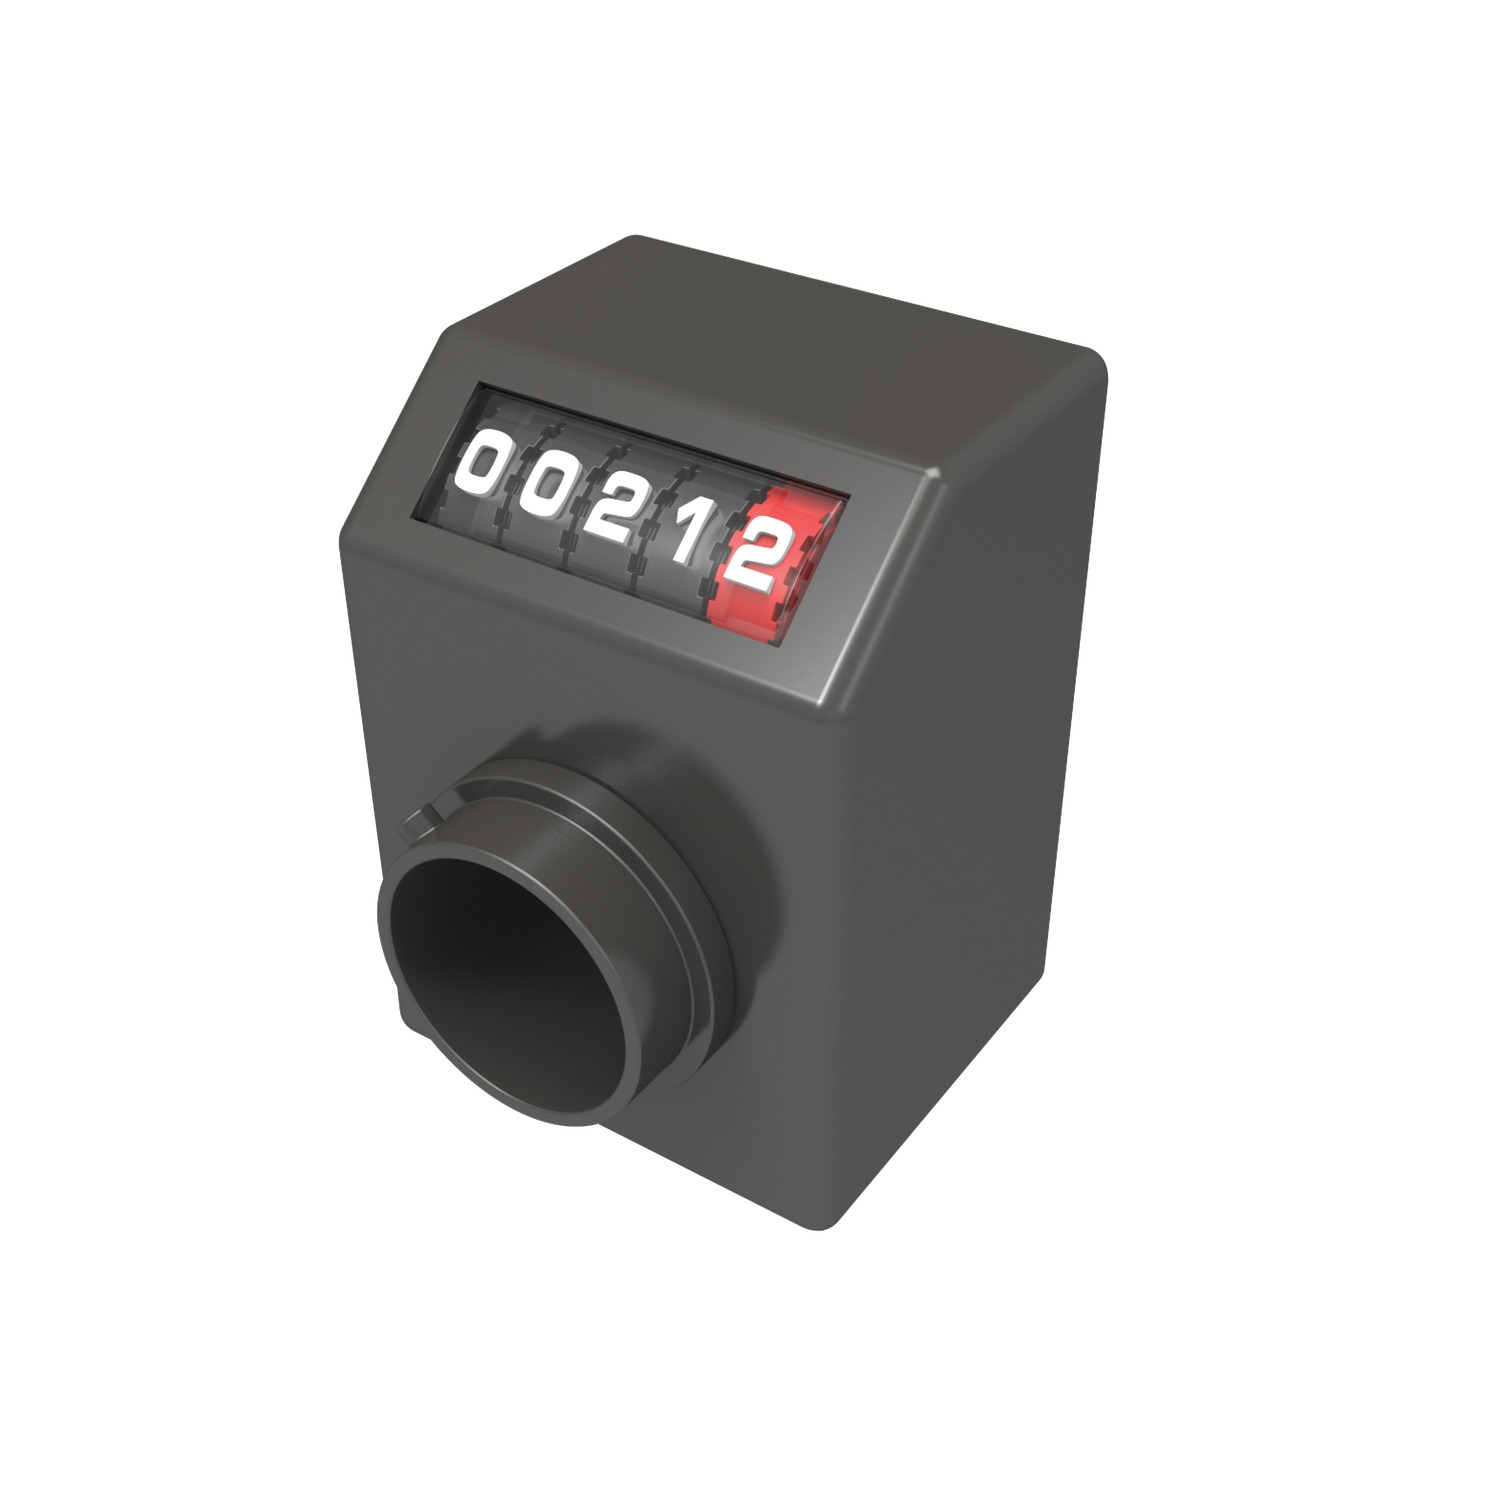 Product L1472, Position Counters 5 digit display / 